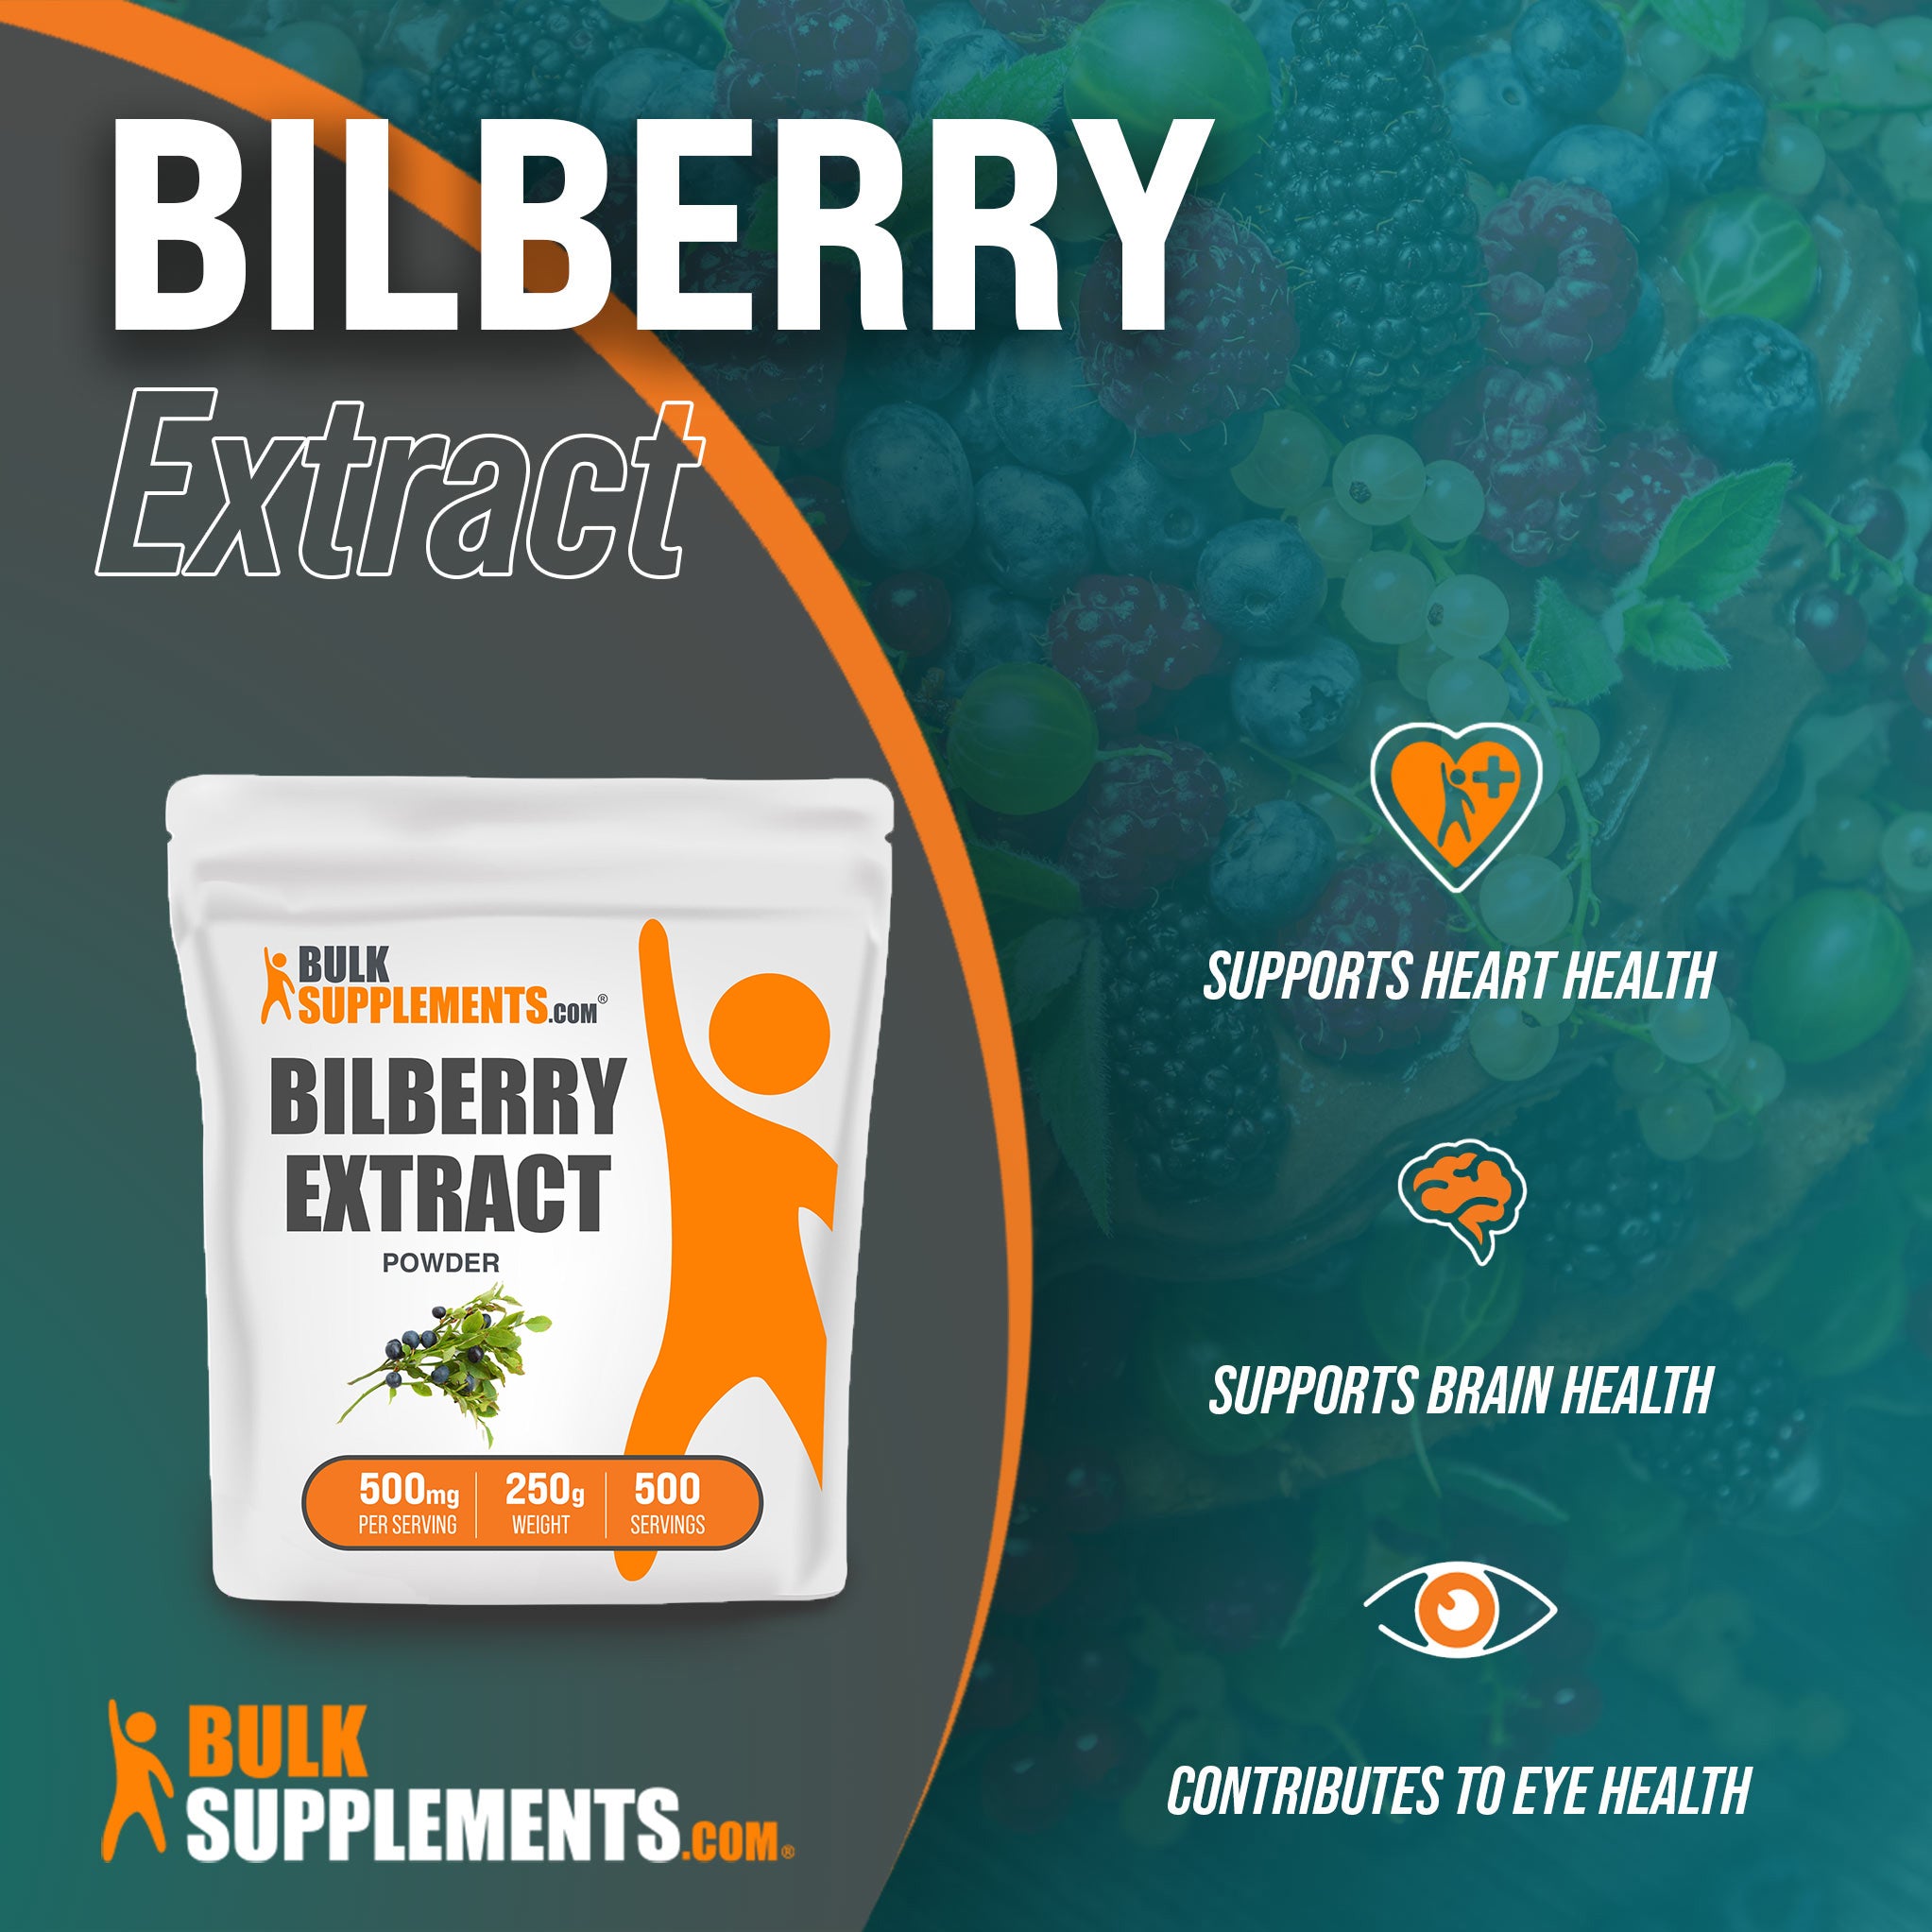 250g Bilberry Extract is an ideal eye supplement